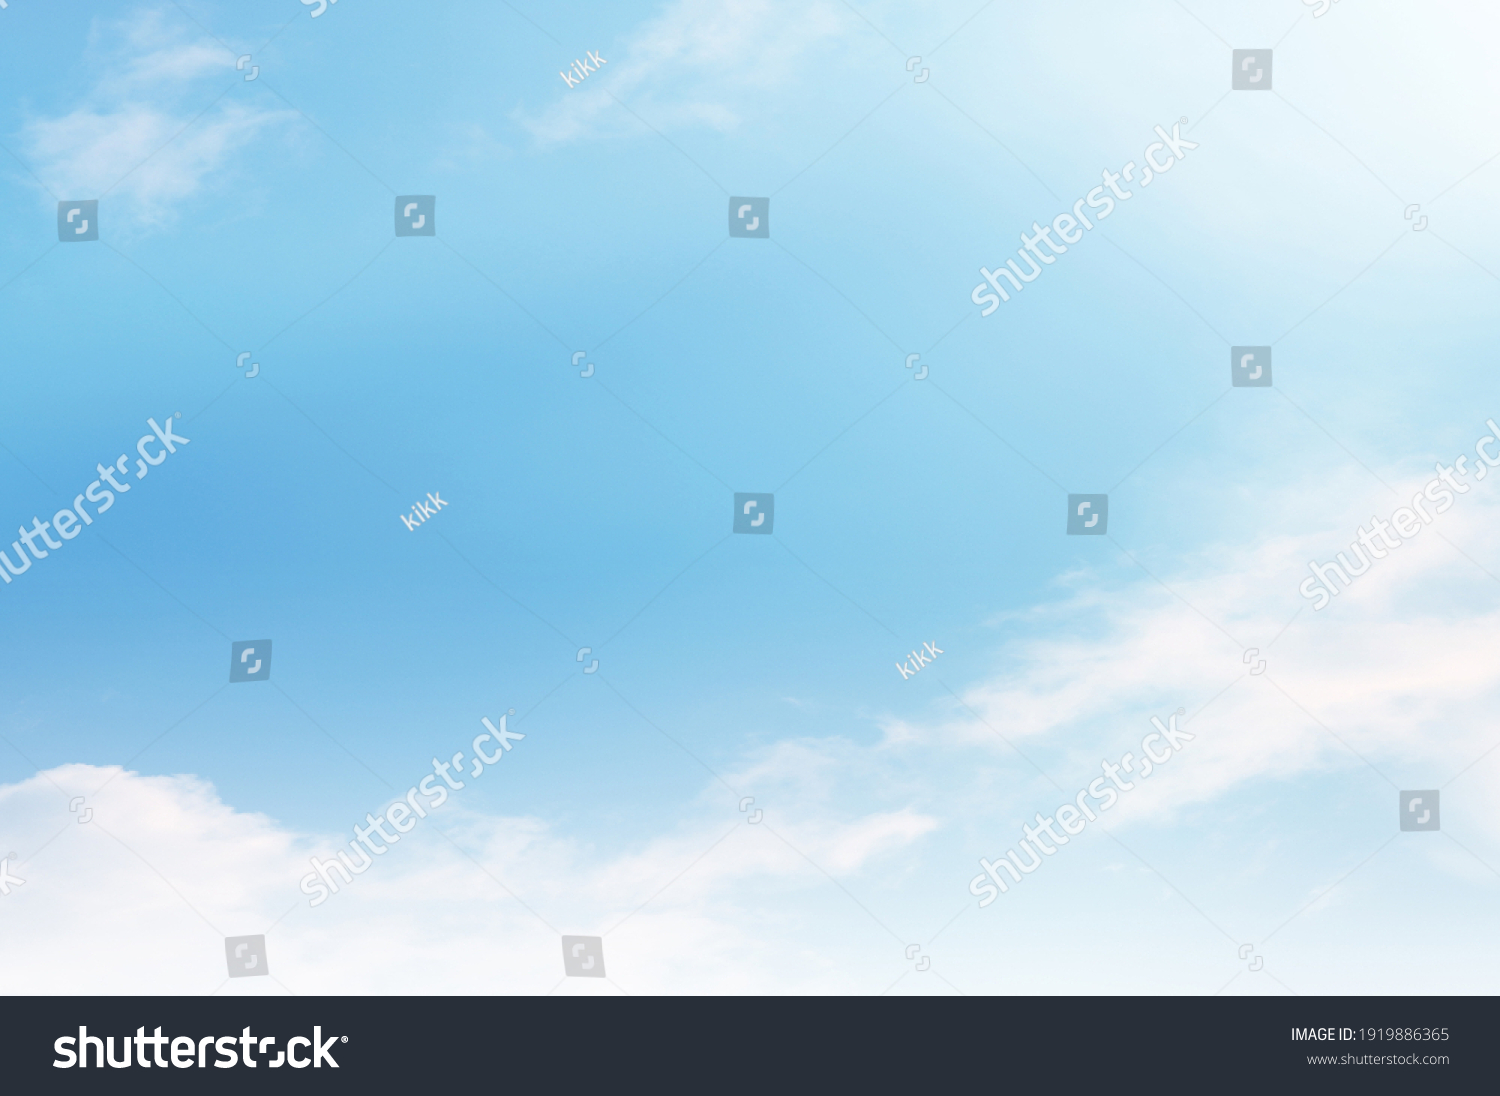 20,220,274 Summer sky Stock Photos, Images & Photography | Shutterstock